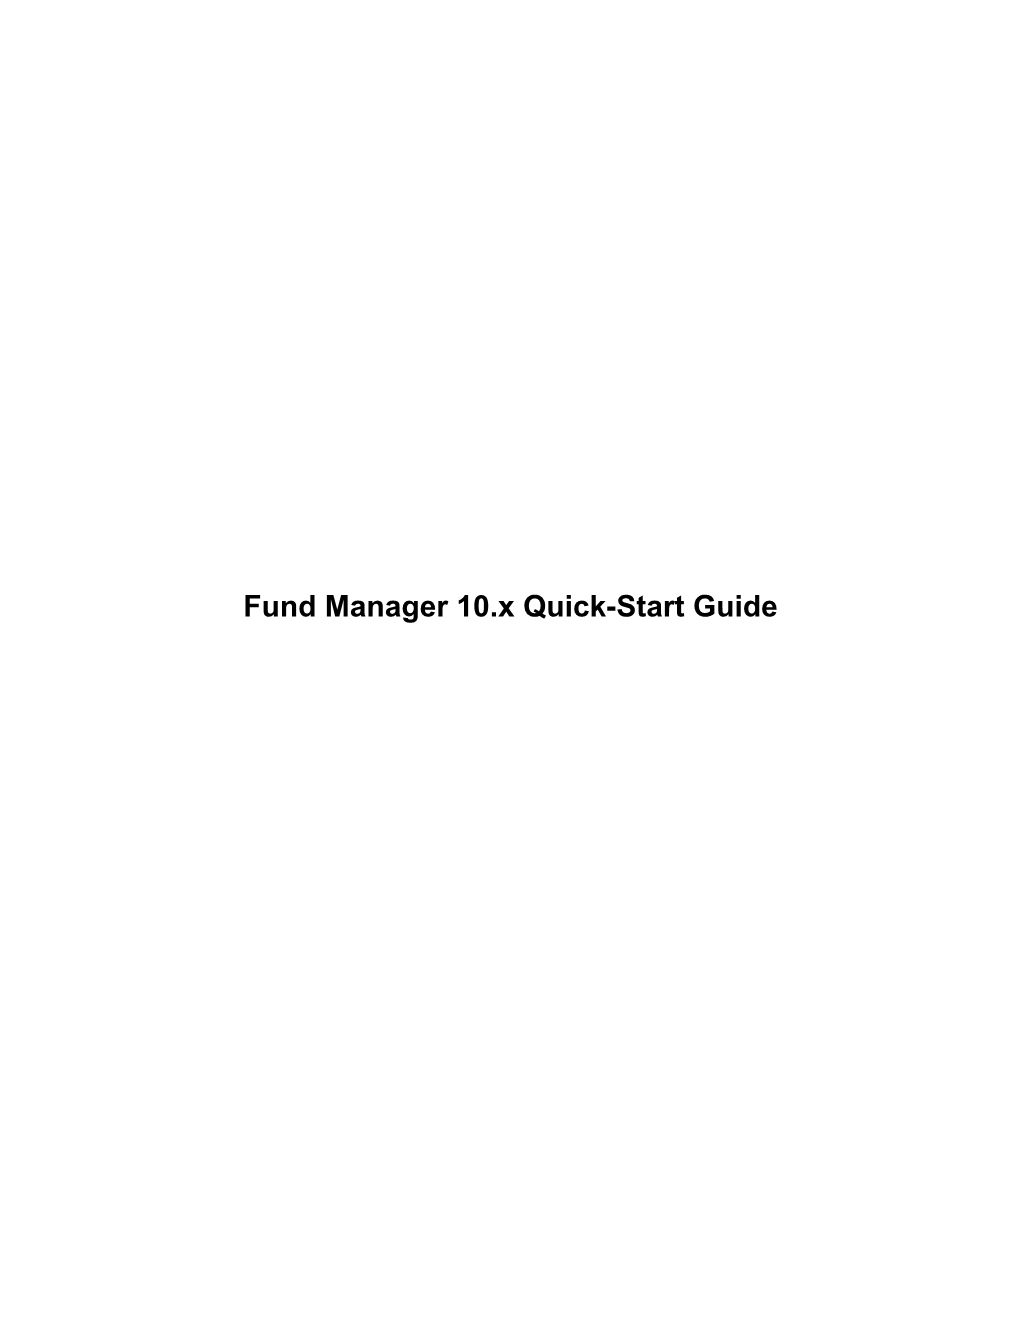 Fund Manager 10.X Quick-Start Guide